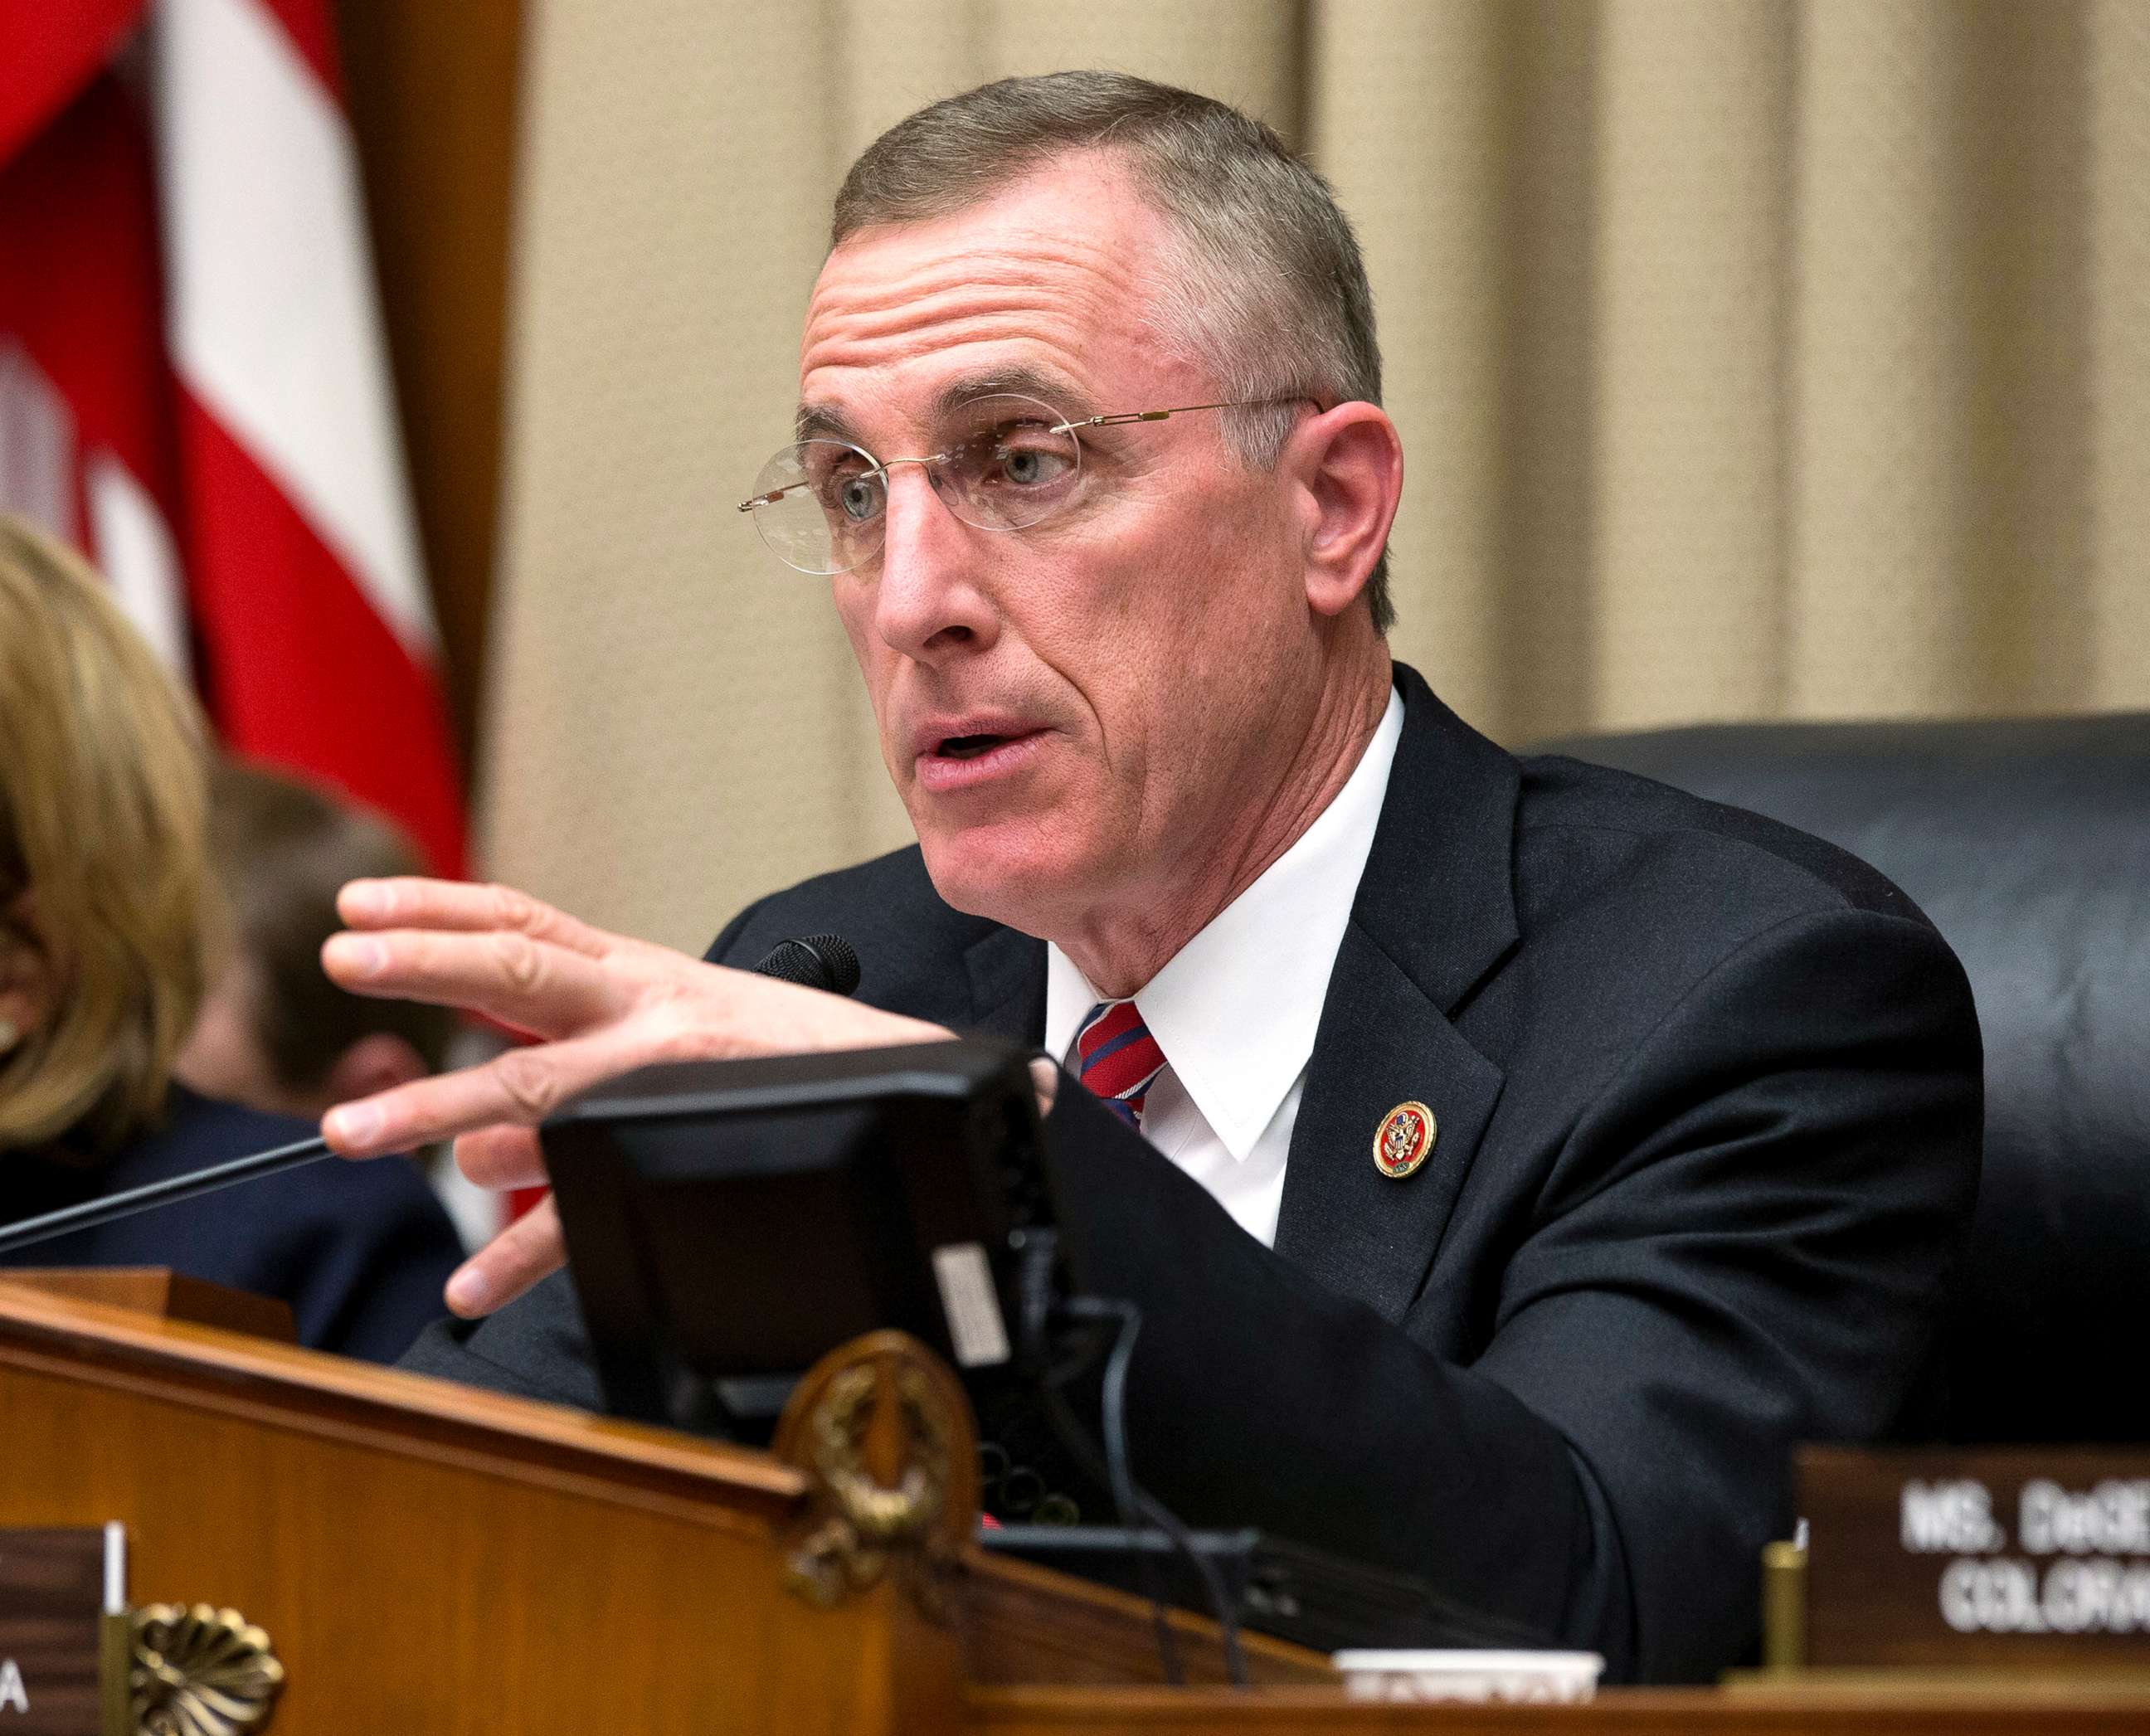 PHOTO: Rep. Tim Murphy, chairman of the House Energy and Commerce subcommittee on Oversight and Investigations during a hearing on Capitol Hill, Oct. 3, 2017.